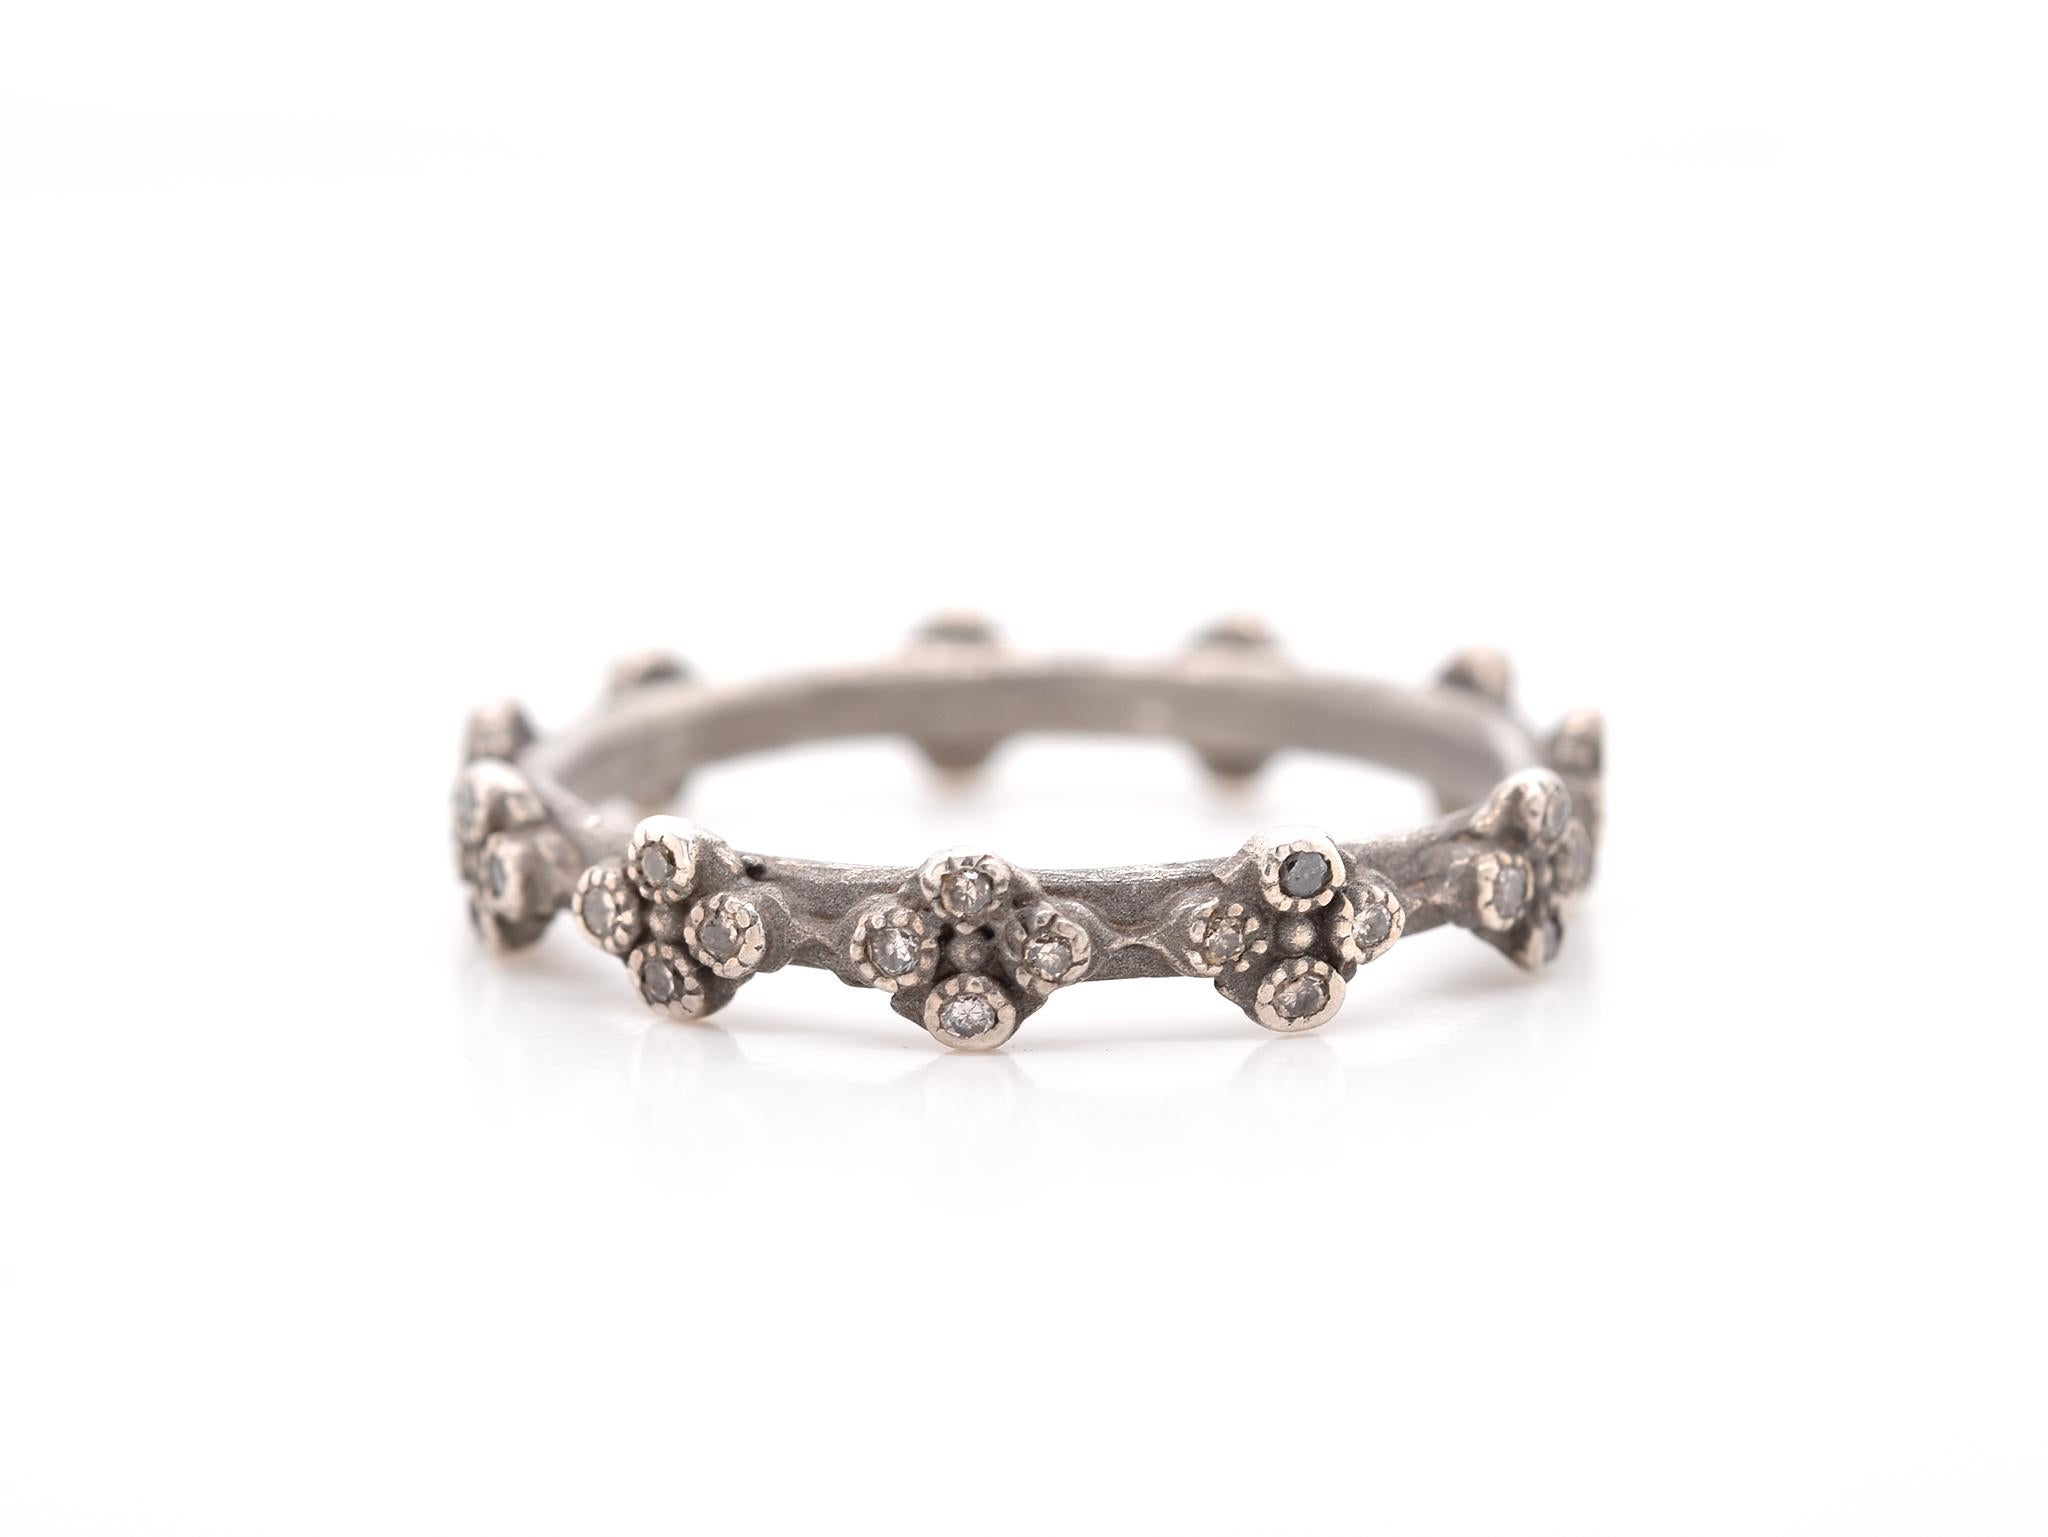 Designer: Armenta
Material: sterling silver
Diamonds: 44 round brilliant cut champagne diamonds = 0.25cttw
Ring Size: 6 ¼ 
Dimensions: band measures 3.60mm wide
Weight: 1.94 grams
